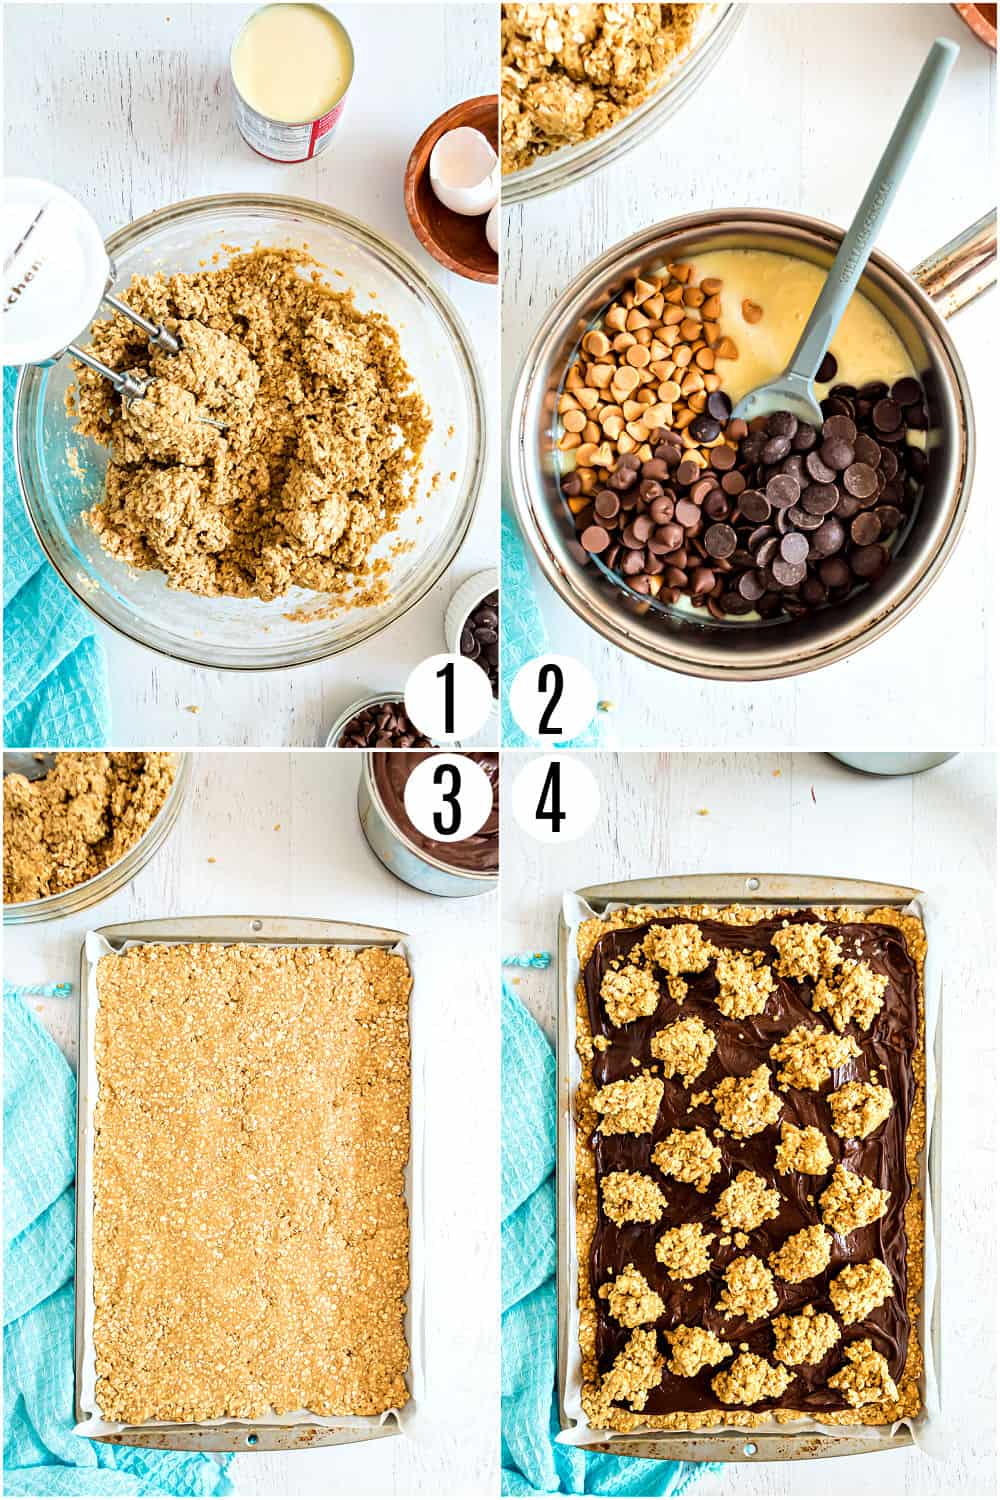 Step by step photos showing how to make oatmeal cookie bars.